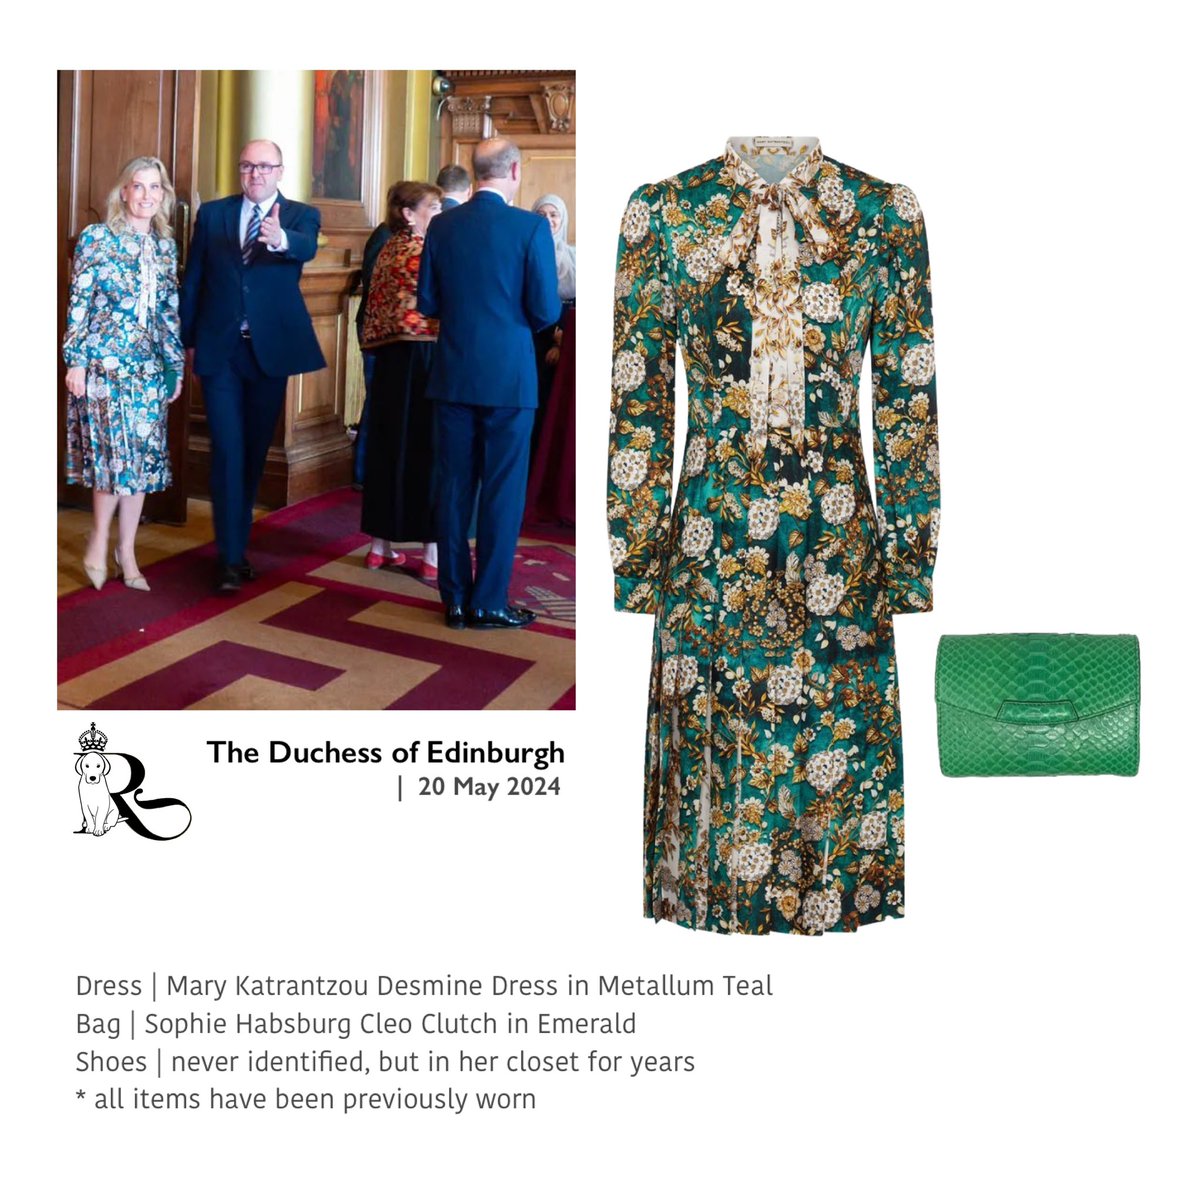 The Duke and Duchess of Edinburgh attended an event at the Edinburgh City Chambers in preparation for the “Edinburgh 900” celebrations. #TheDuchessofEdinburgh #SuperSophie